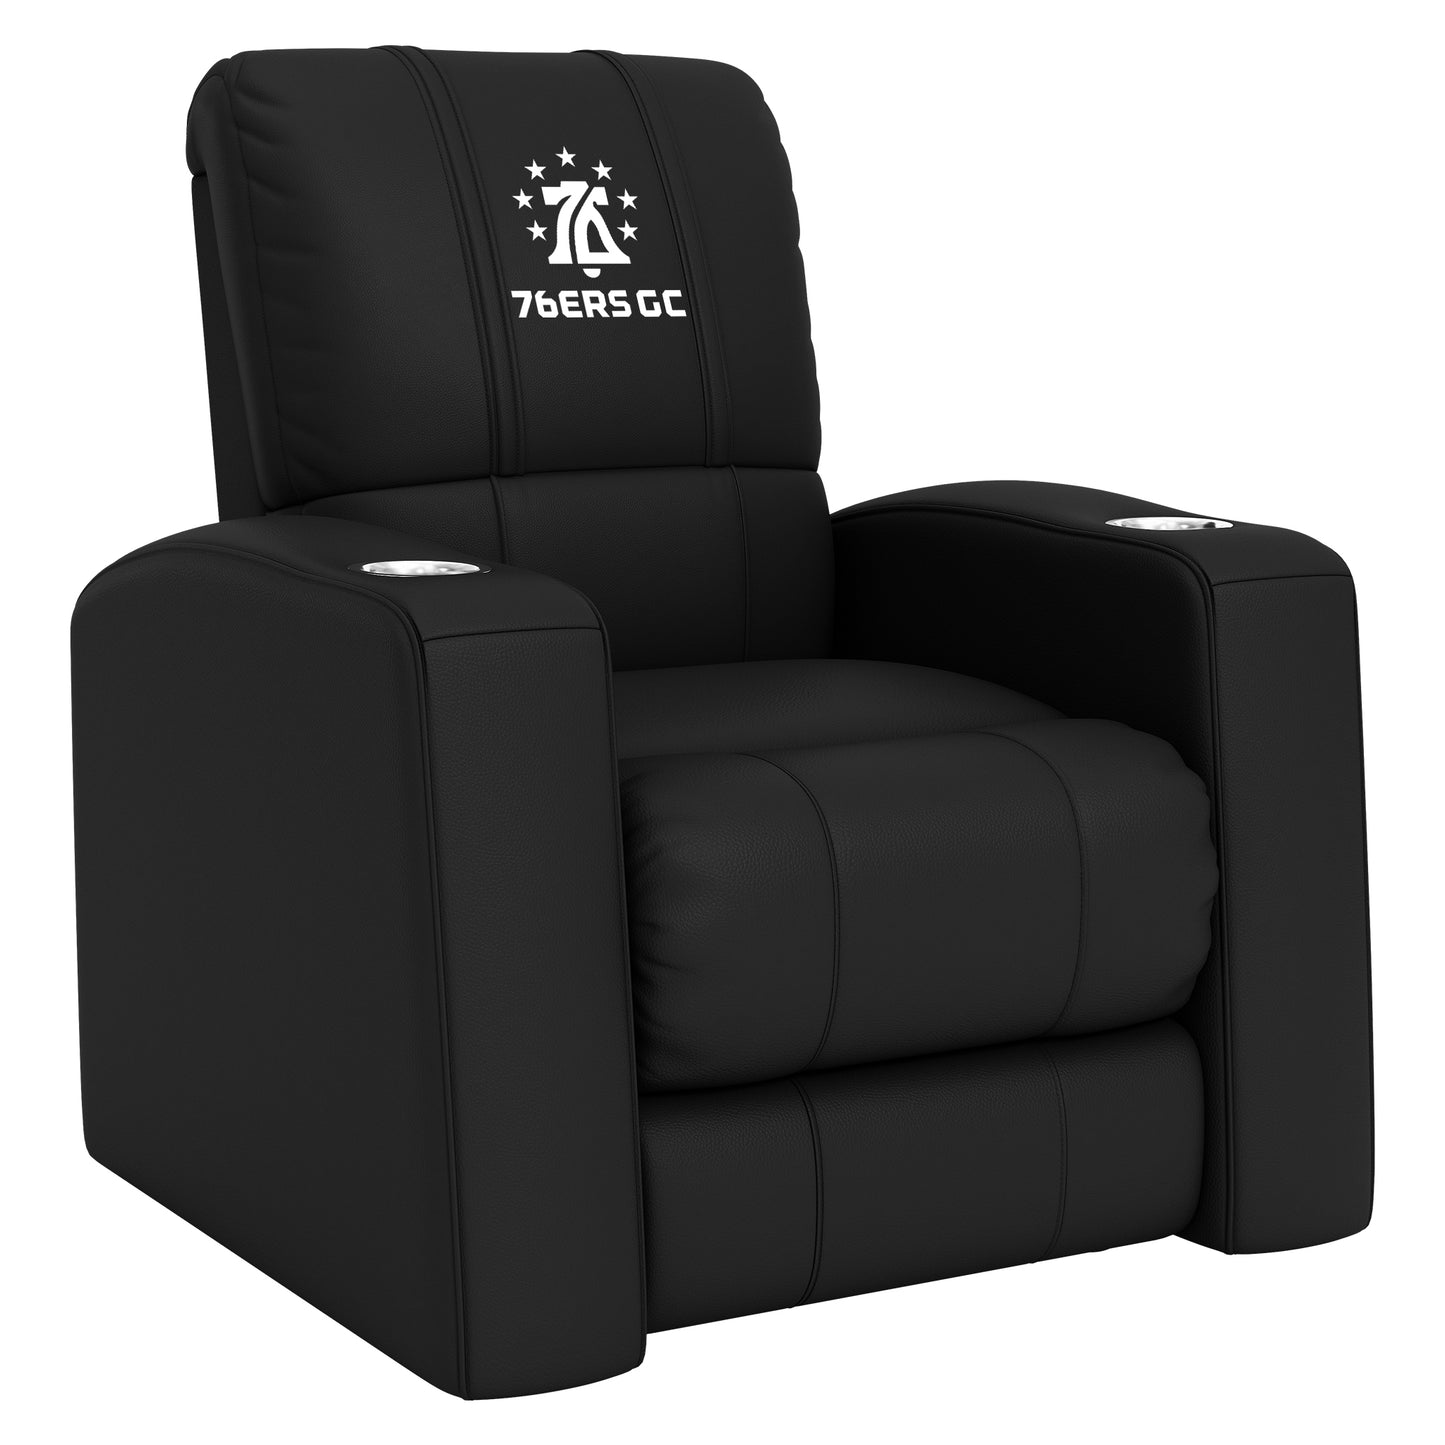 Relax Home Theater Recliner with Philadelphia 76ers GC All White [CAN ONLY BE SHIPPED TO PENNSYLVANIA]